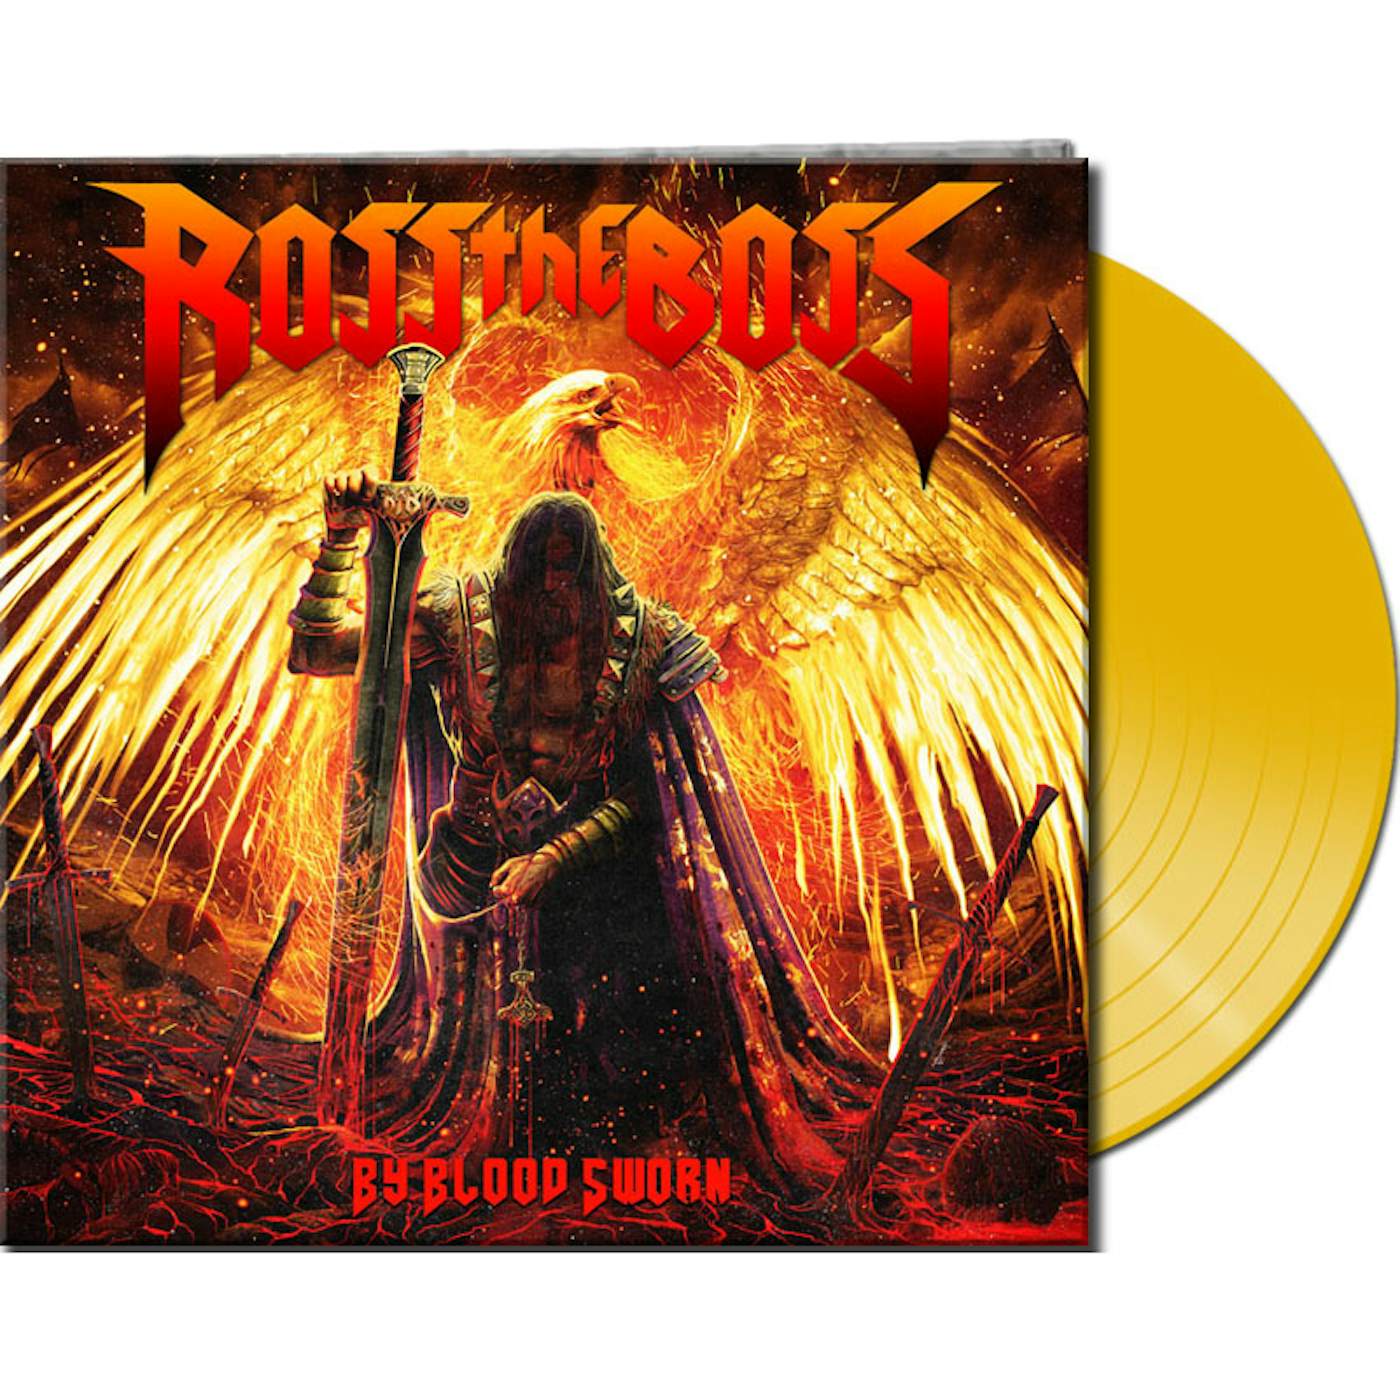 Ross The Boss BY BLOOD SWORN - Limited Edition 180 Gram Yellow Colored Vinyl Record